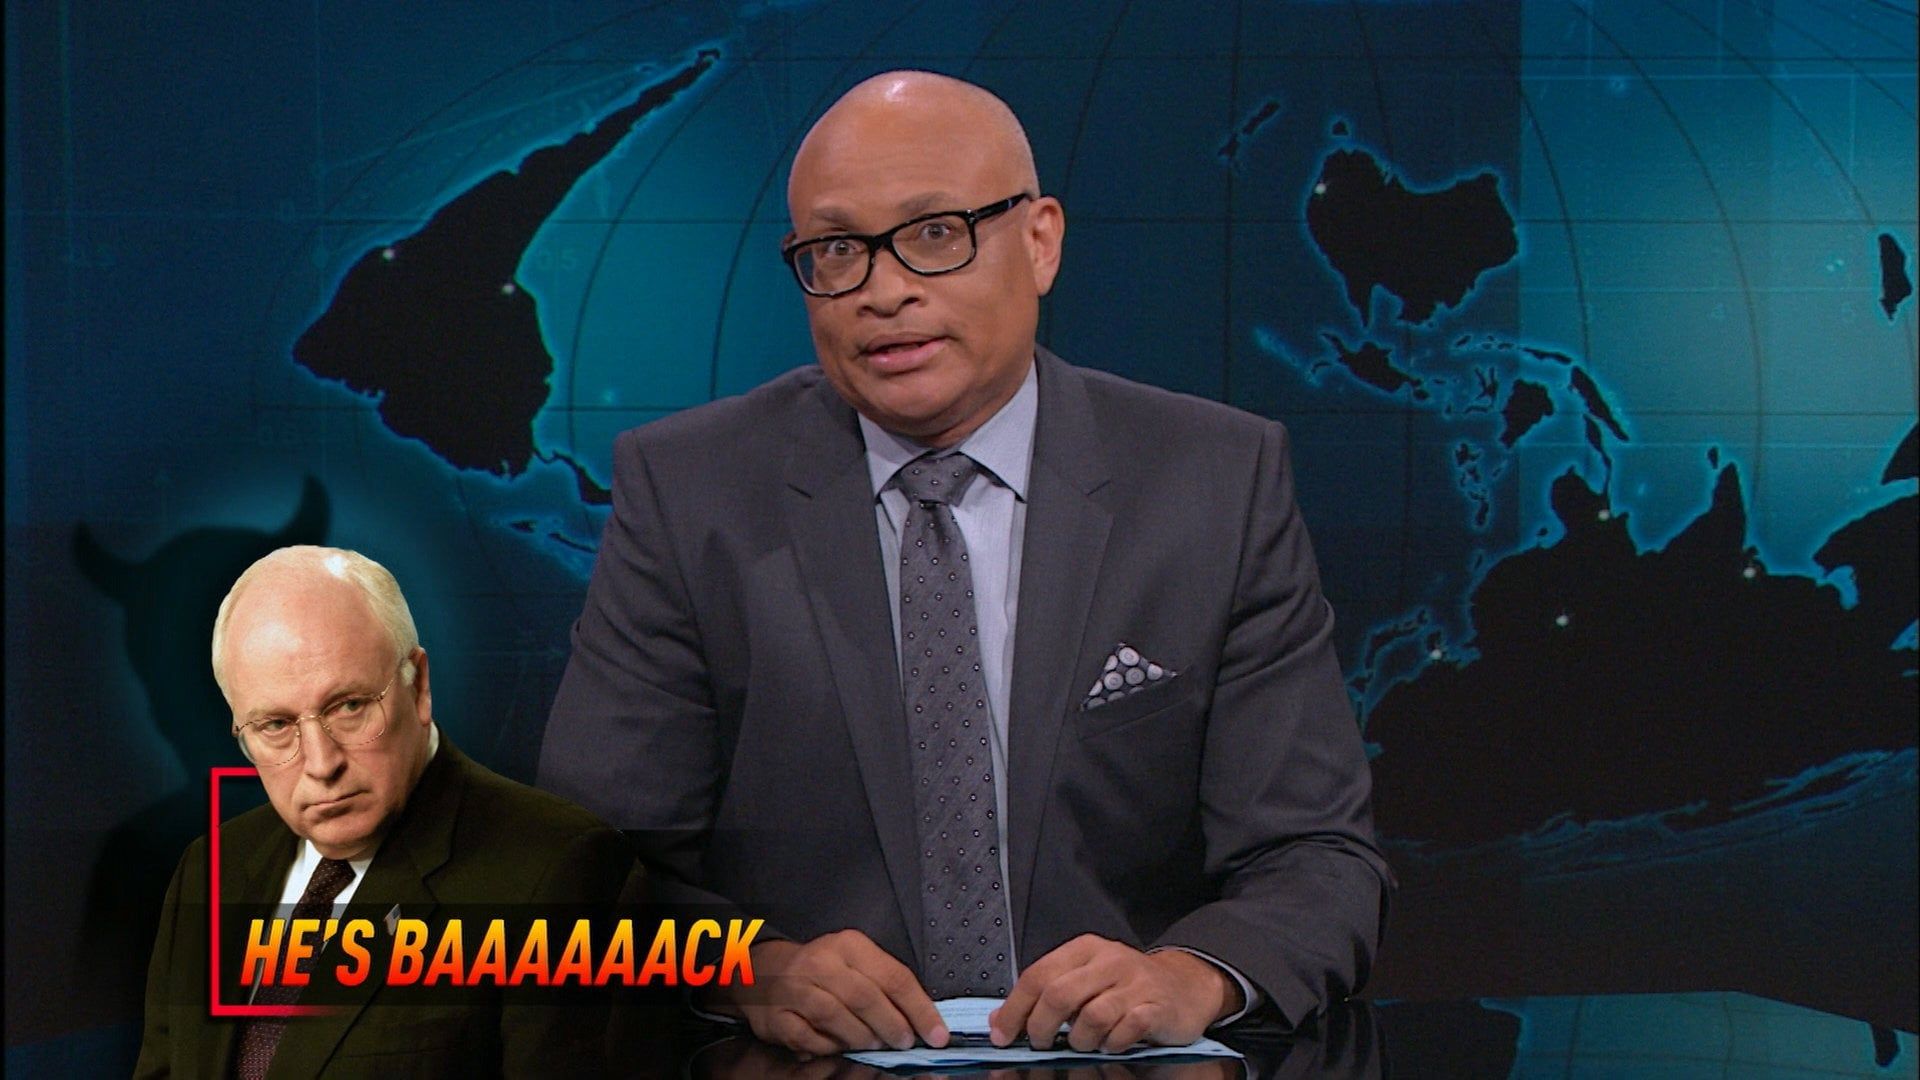 The Nightly Show with Larry Wilmore background